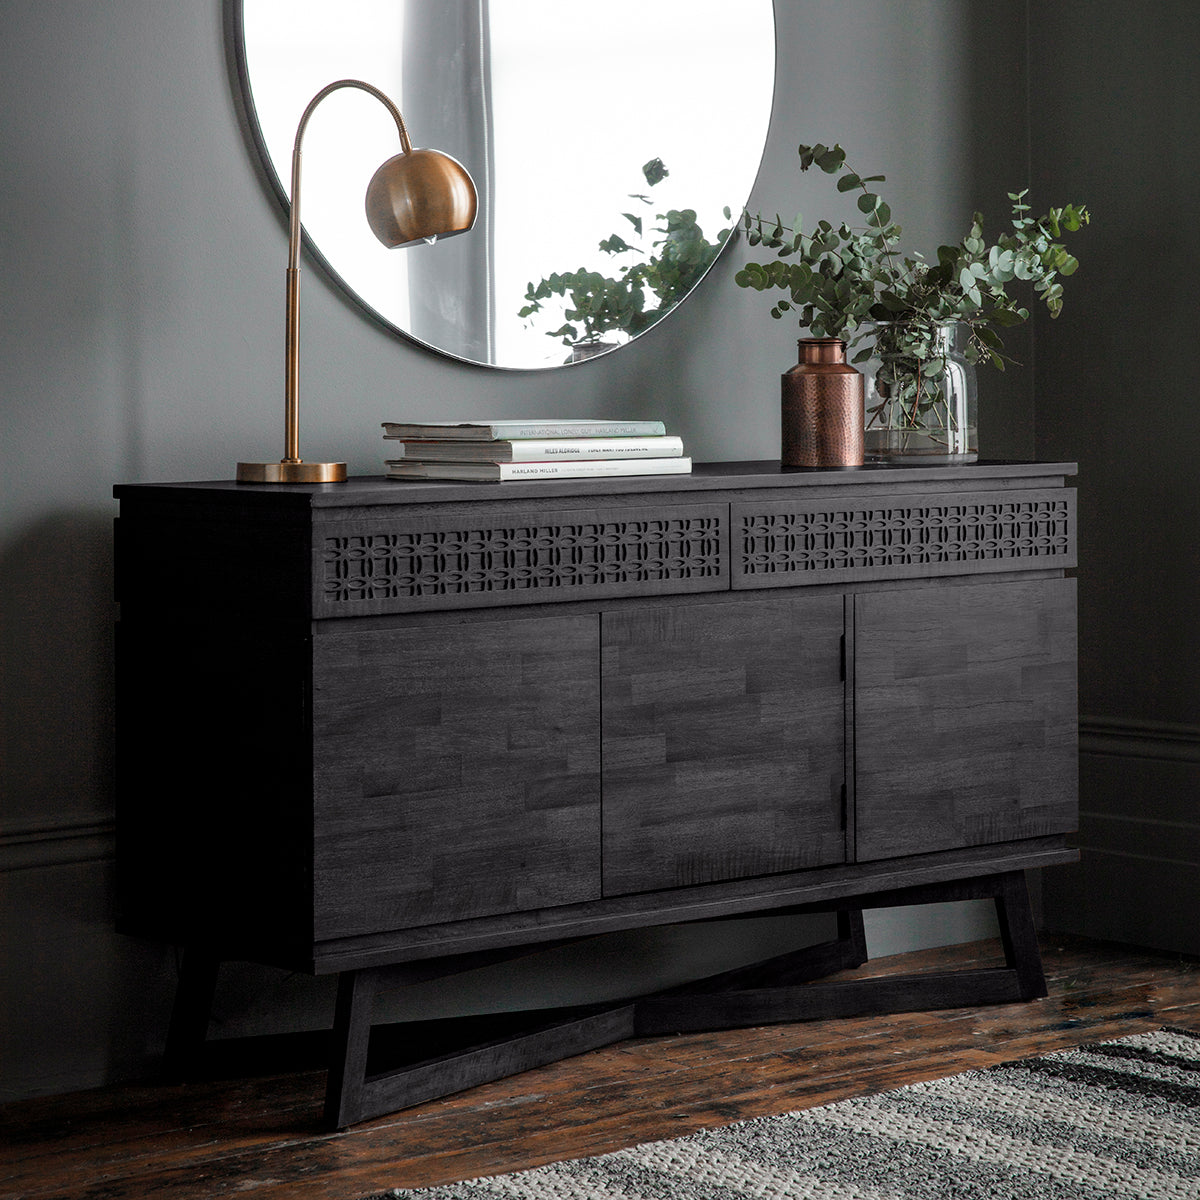 A Dartington Boutique 3Dr/2Drwr Sideboard 1400x450x800mm in a room with interior decor and home furniture.